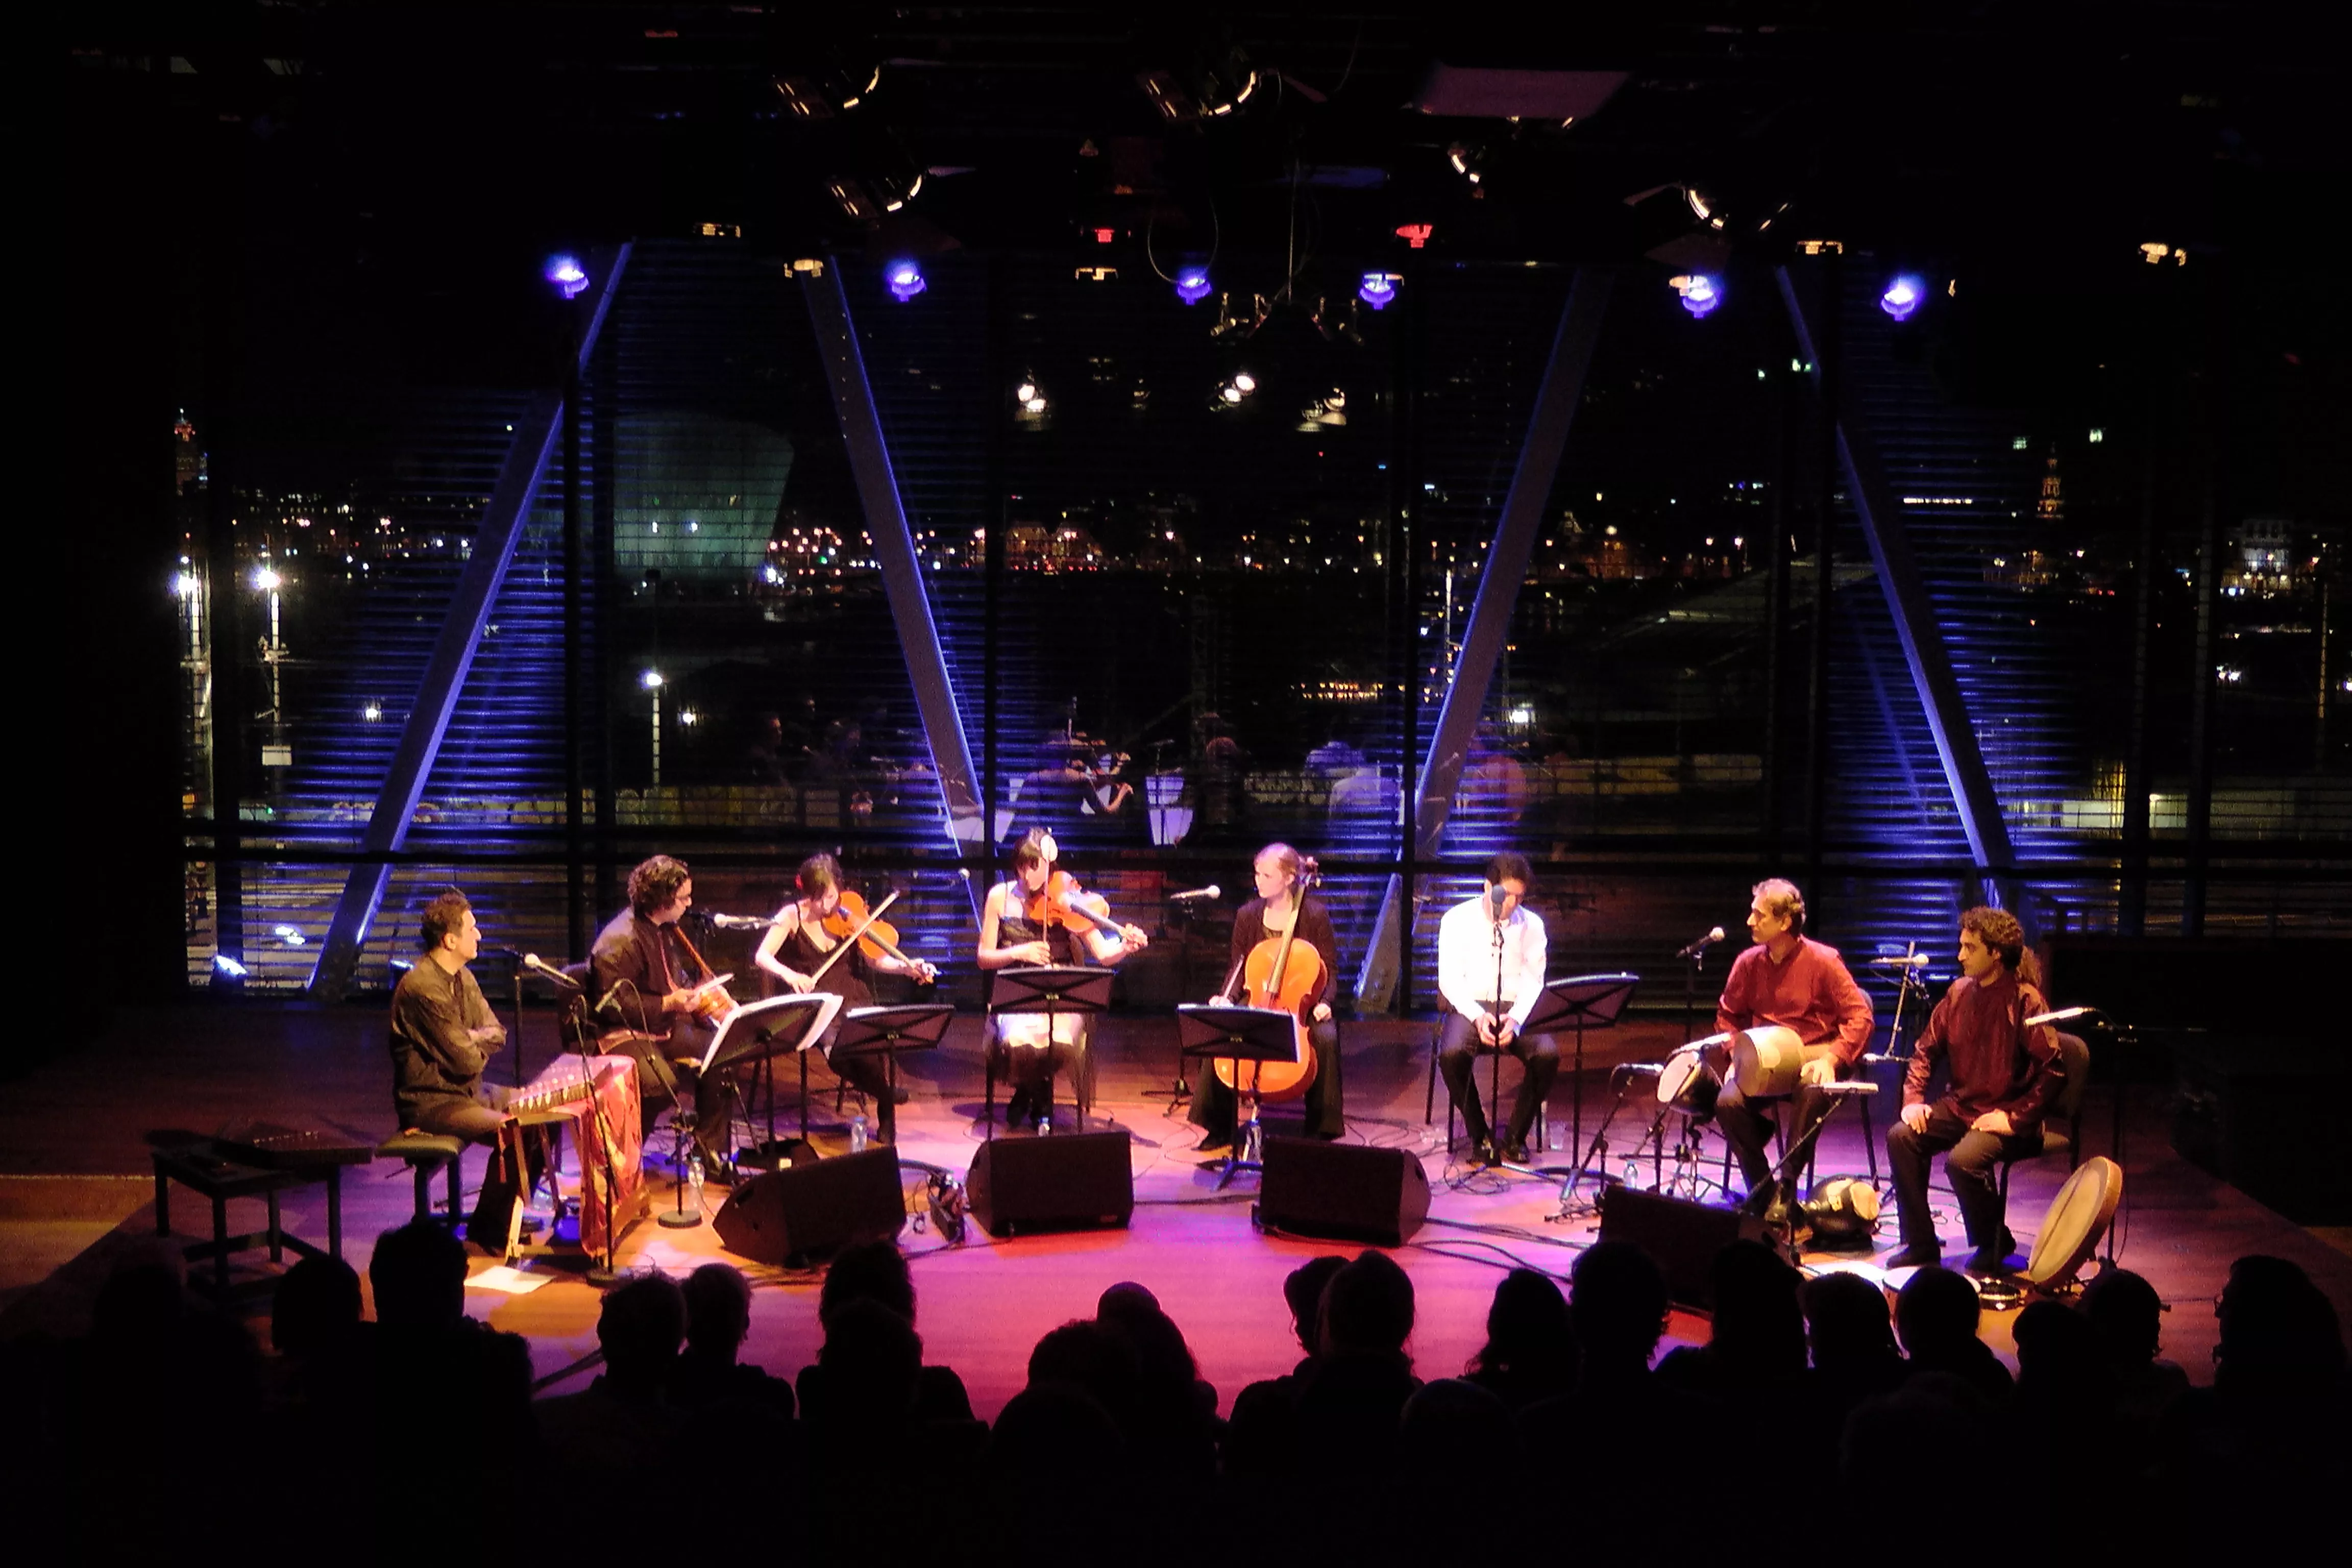 Bimhuis in Netherlands, Europe | Live Music Venues - Rated 3.7